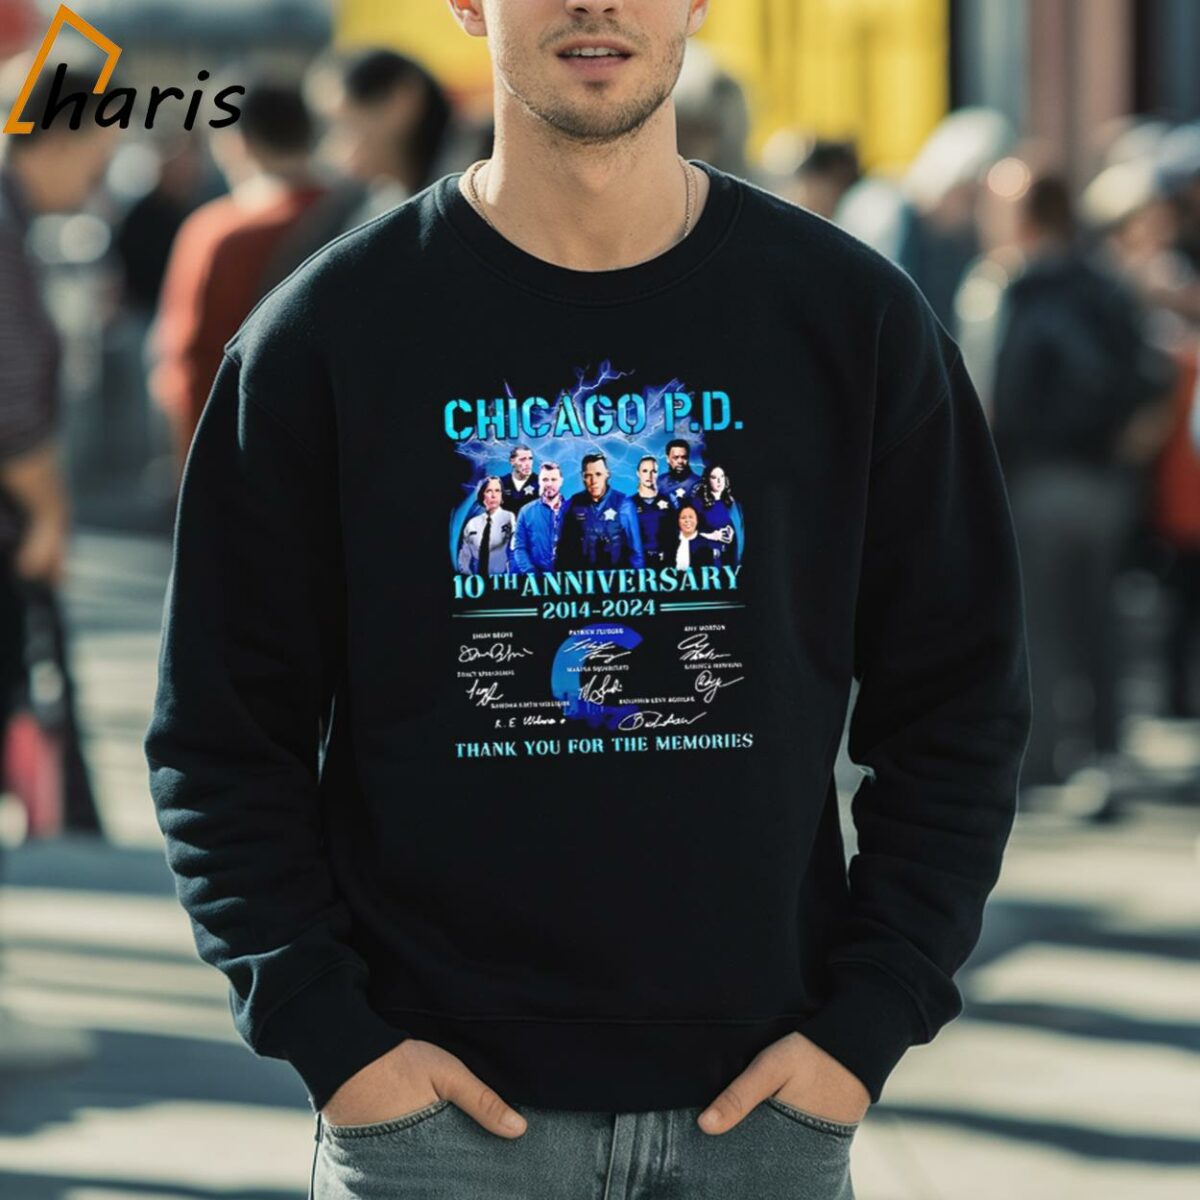 Chicago PD Characters 10th Anniversary 2014 2024 Thank You For The Memories T Shirt 5 sweatshirt